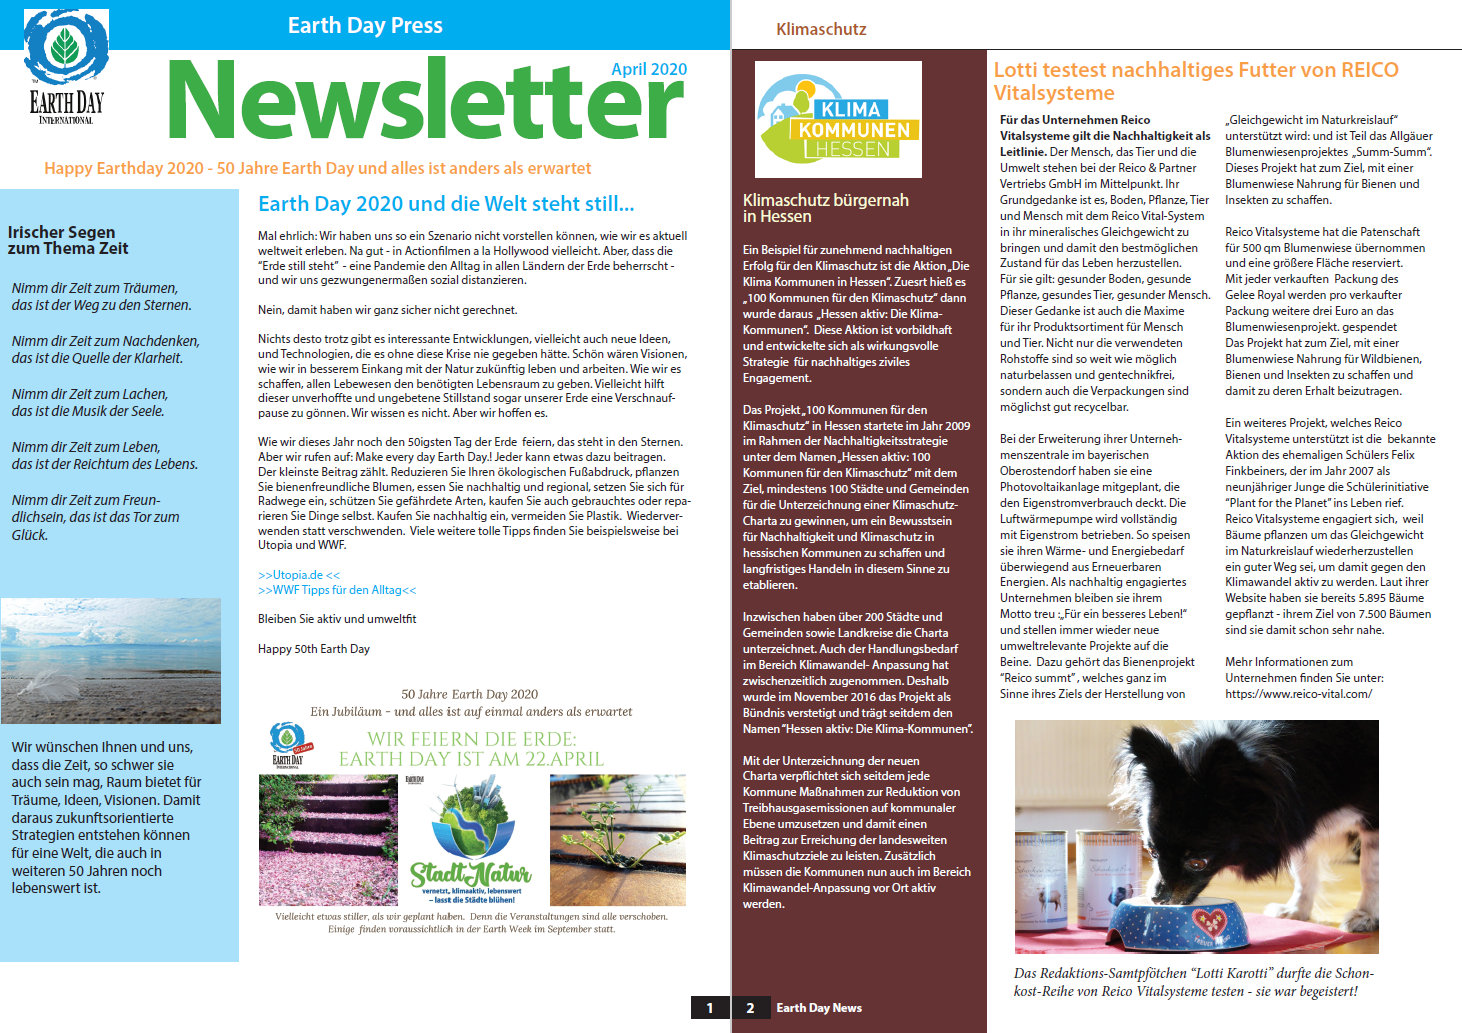 Earth Day Press Newsletter 04/2020